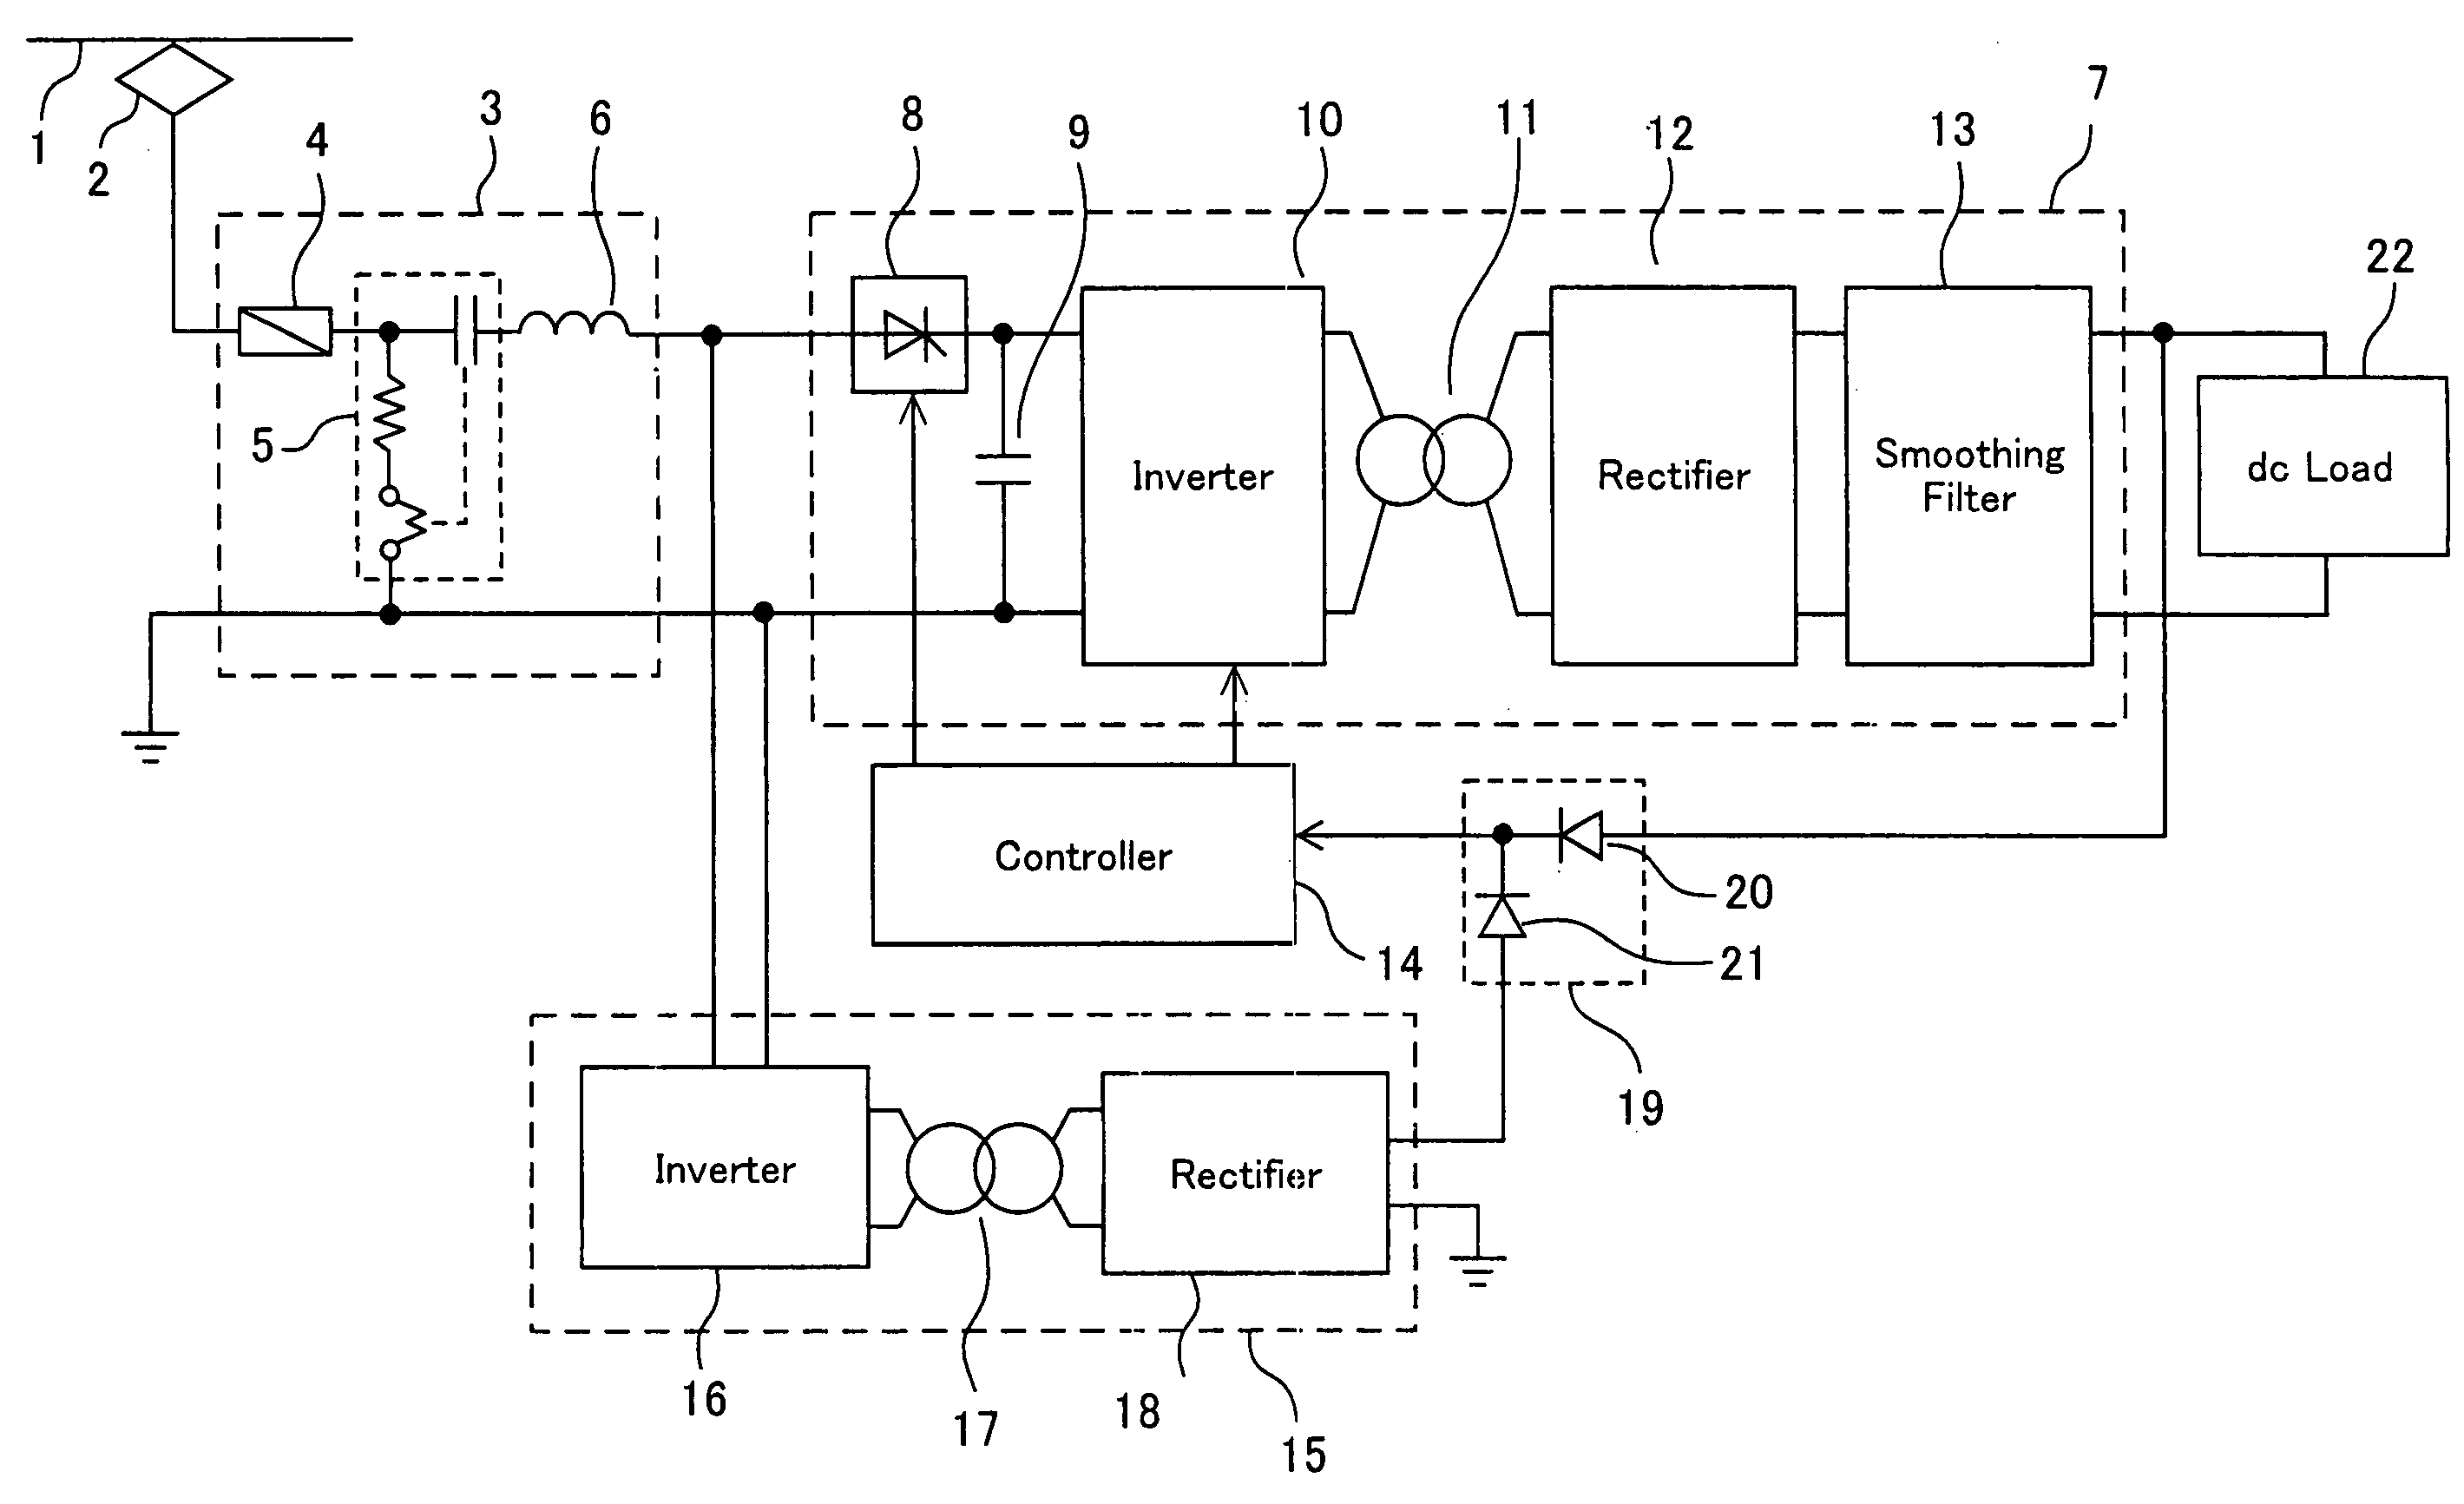 Vehicle auxiliary electric-power-supplying system